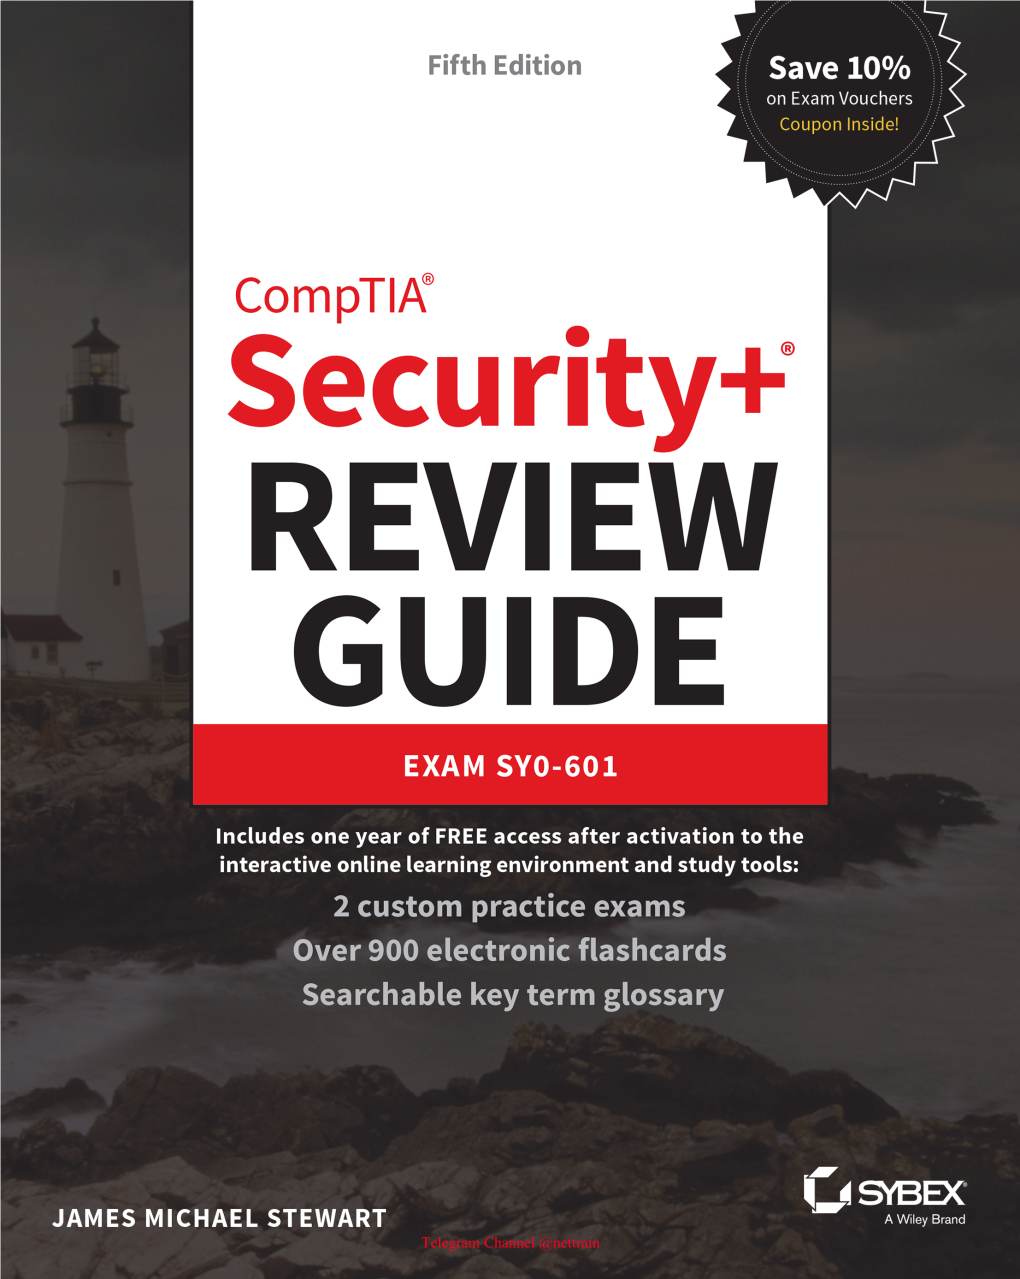 Comptia® Security+® Review Guide: Exam SY0-601